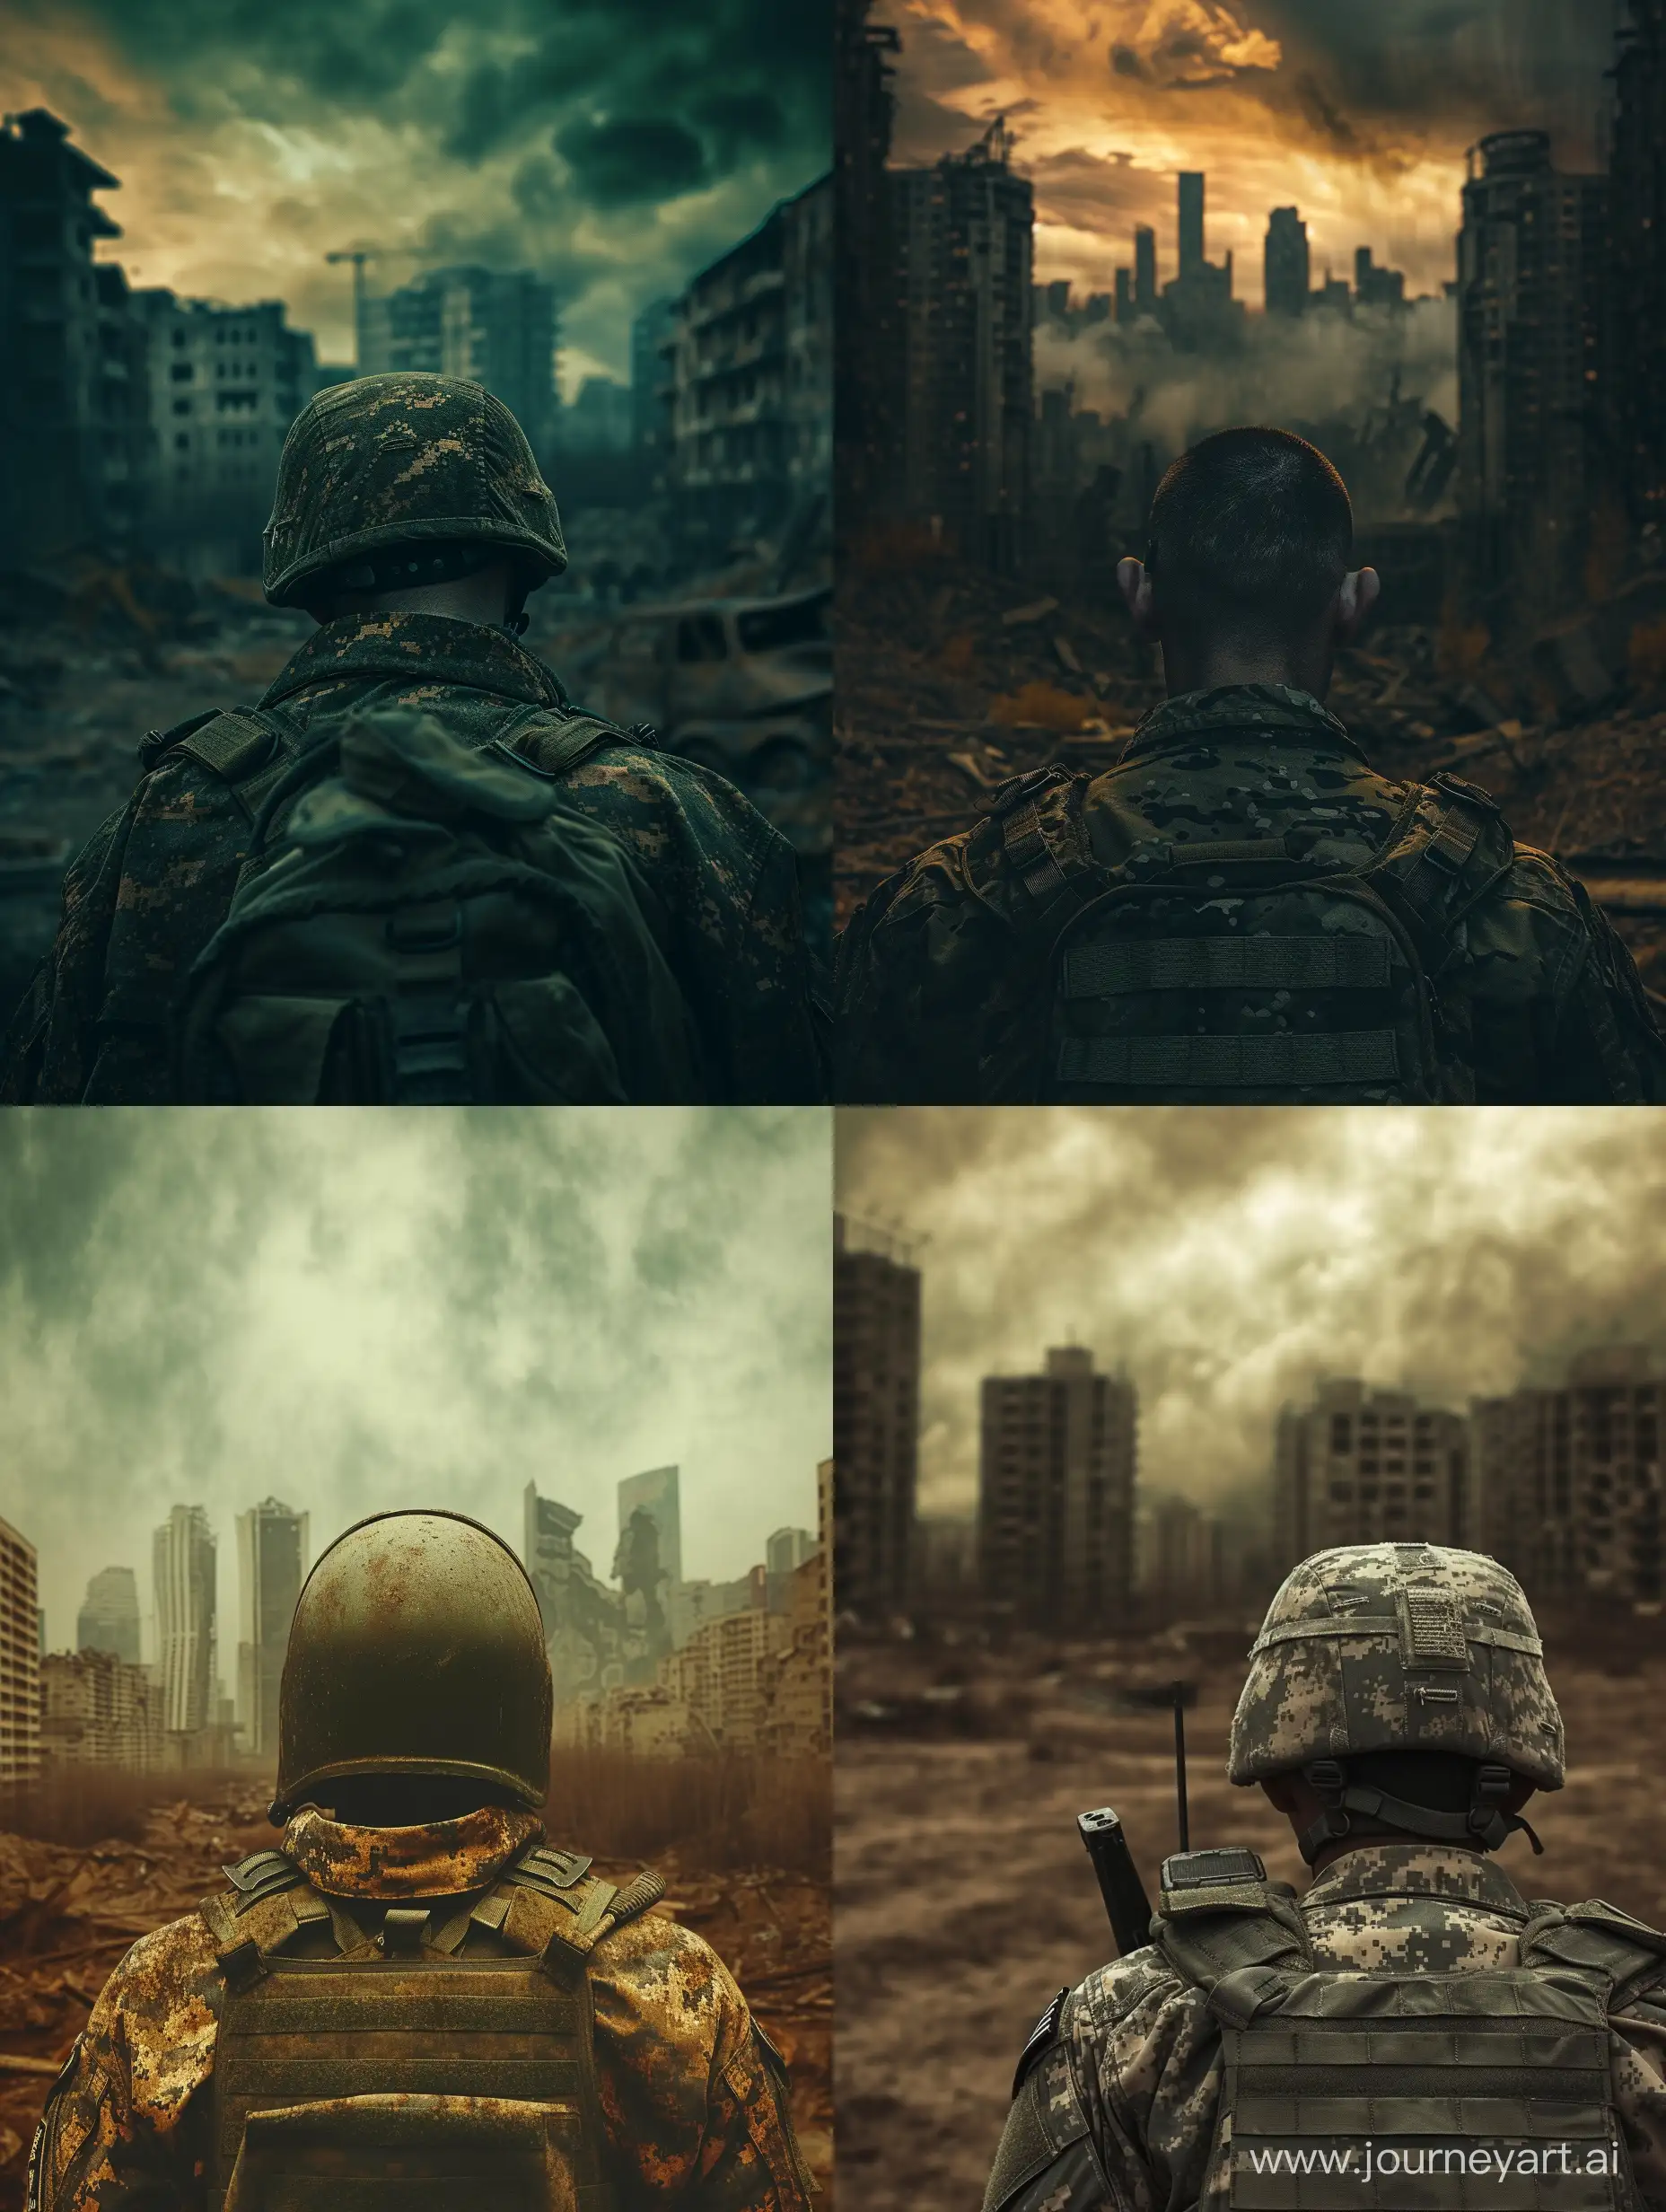 a soldier with the head turned to the camera, post apocalyptic city in the background